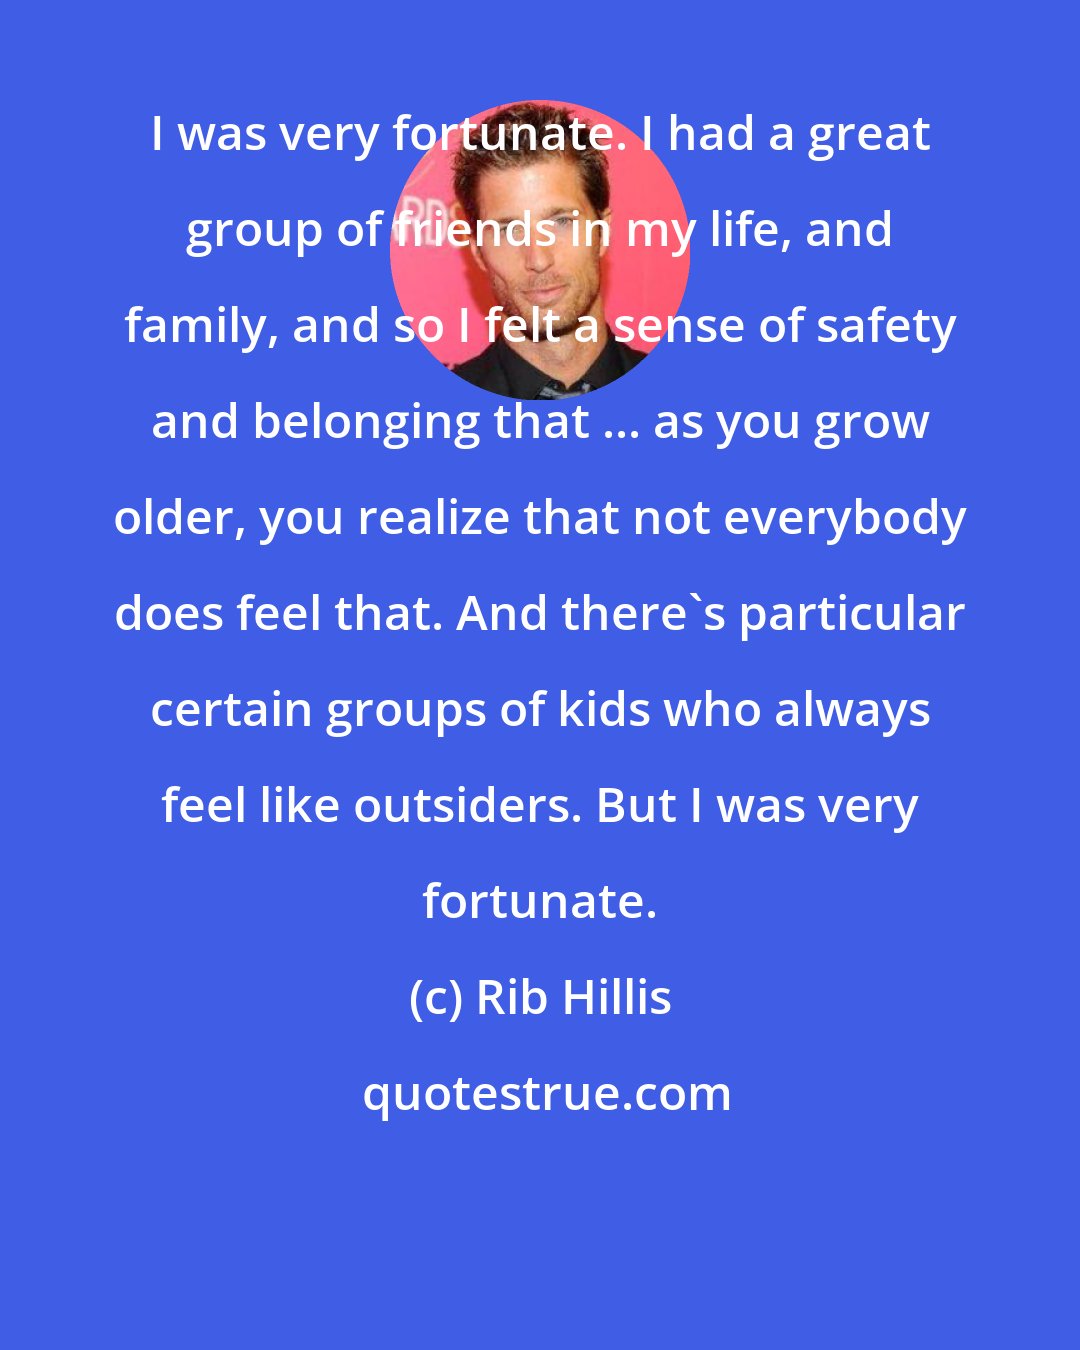 Rib Hillis: I was very fortunate. I had a great group of friends in my life, and family, and so I felt a sense of safety and belonging that ... as you grow older, you realize that not everybody does feel that. And there's particular certain groups of kids who always feel like outsiders. But I was very fortunate.